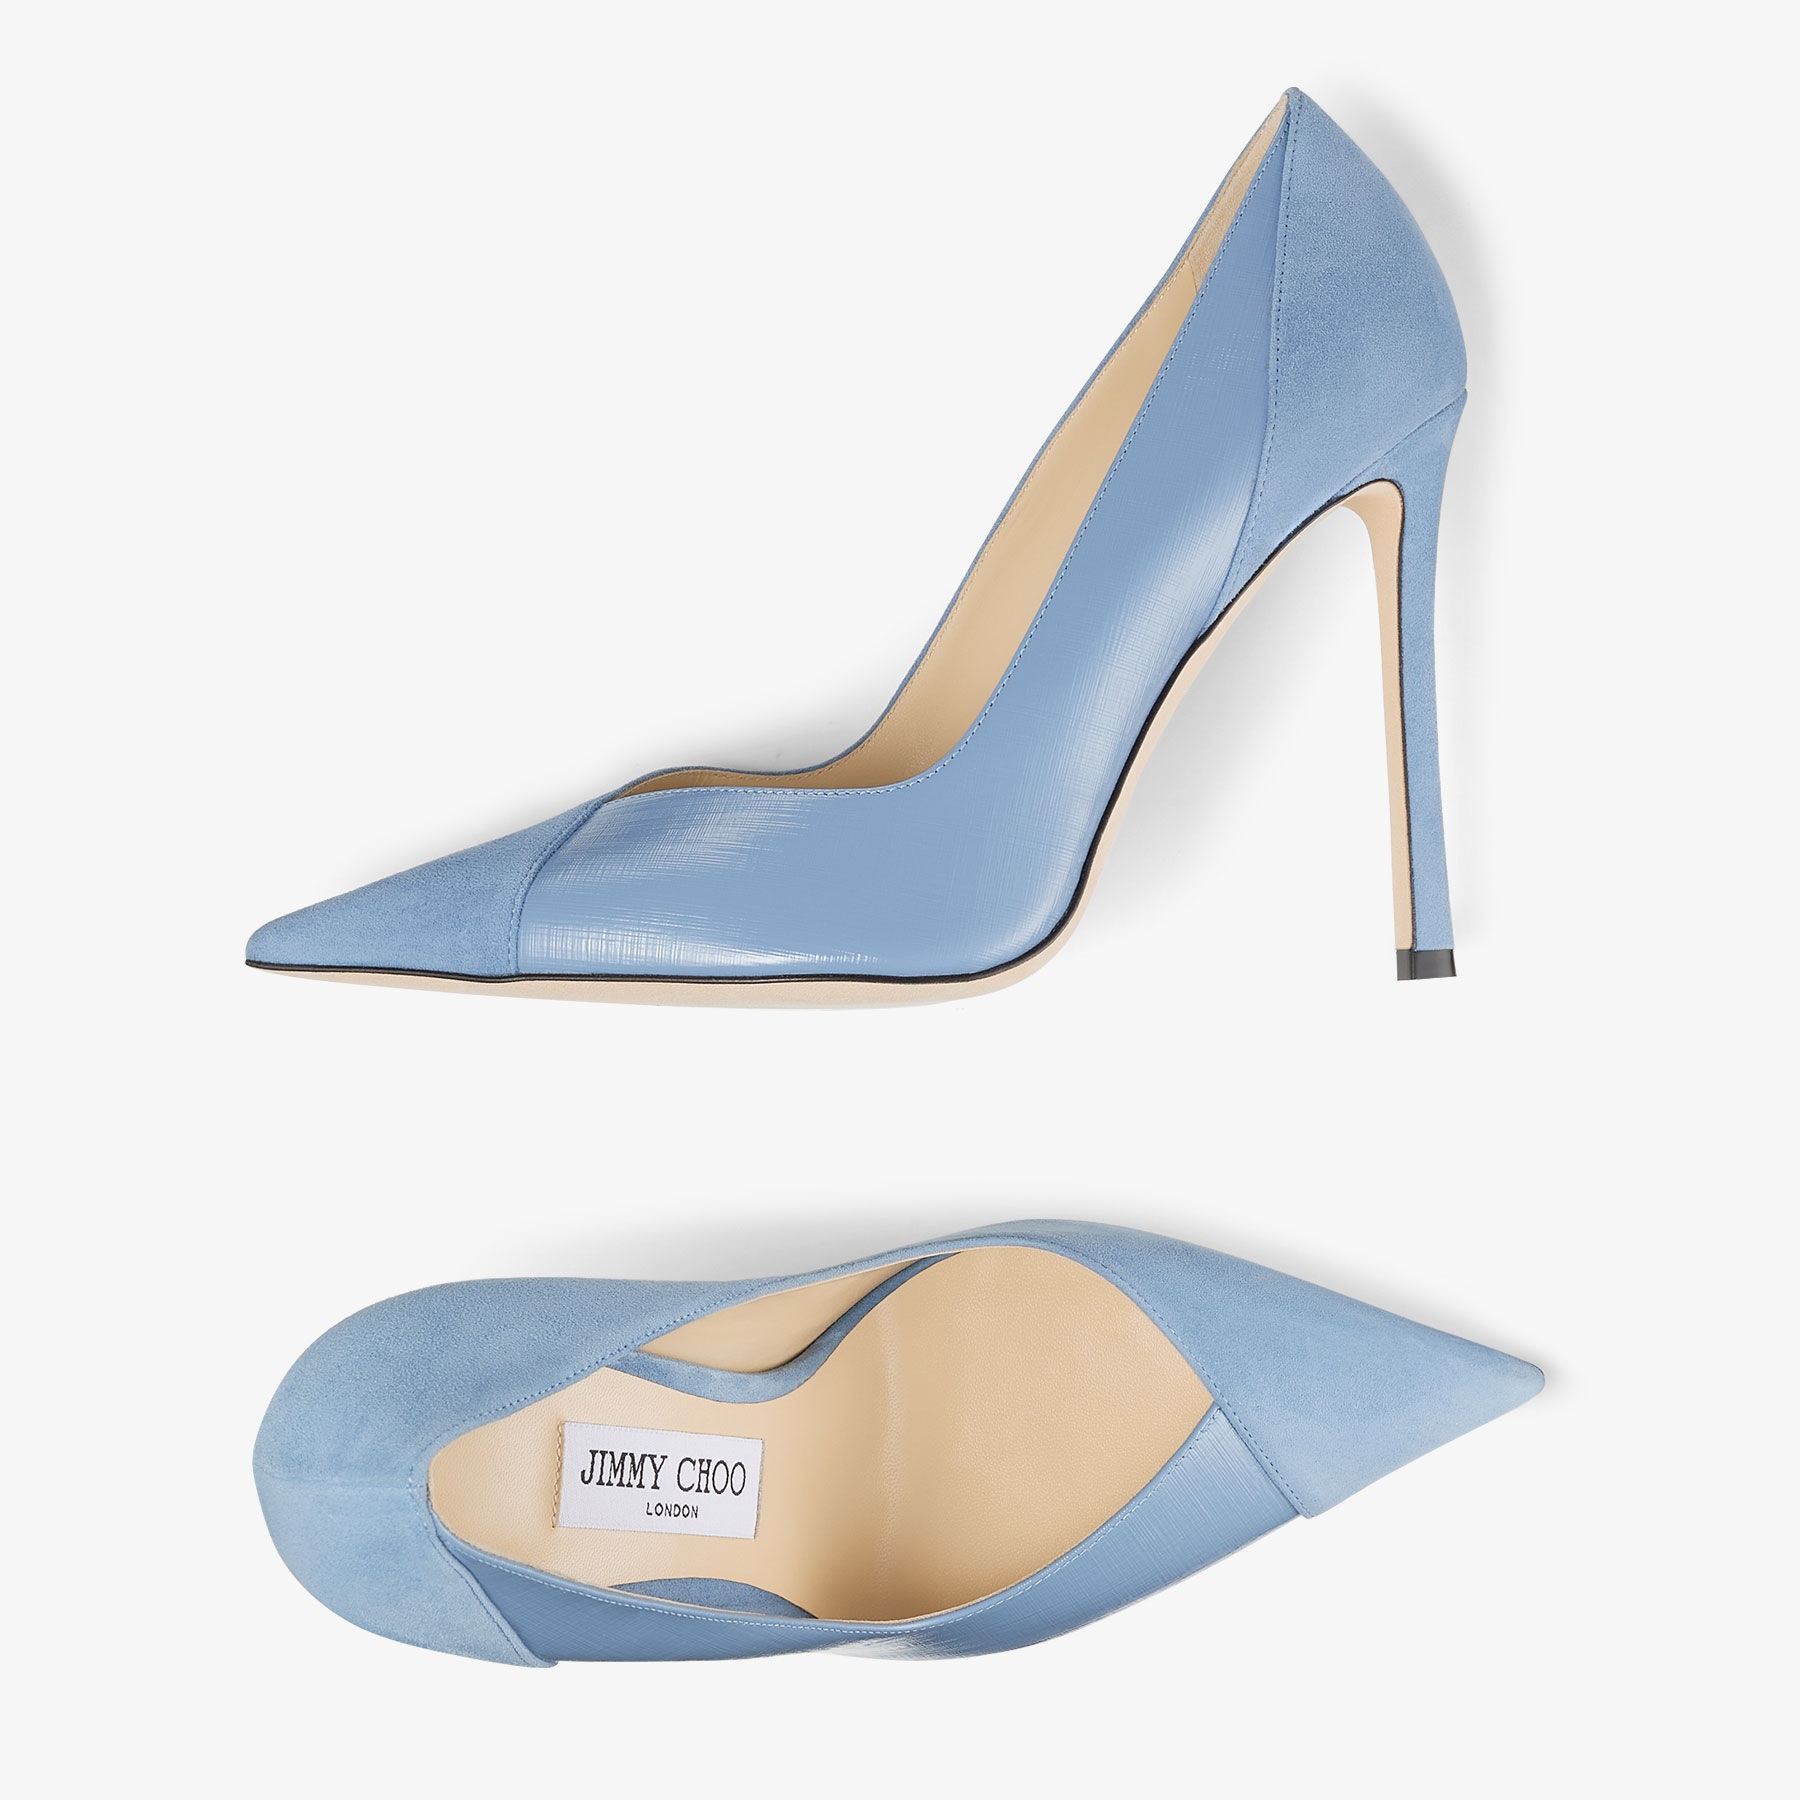 Cass 110
Smoky Blue Suede and Etched Patent Leather Pumps - 5